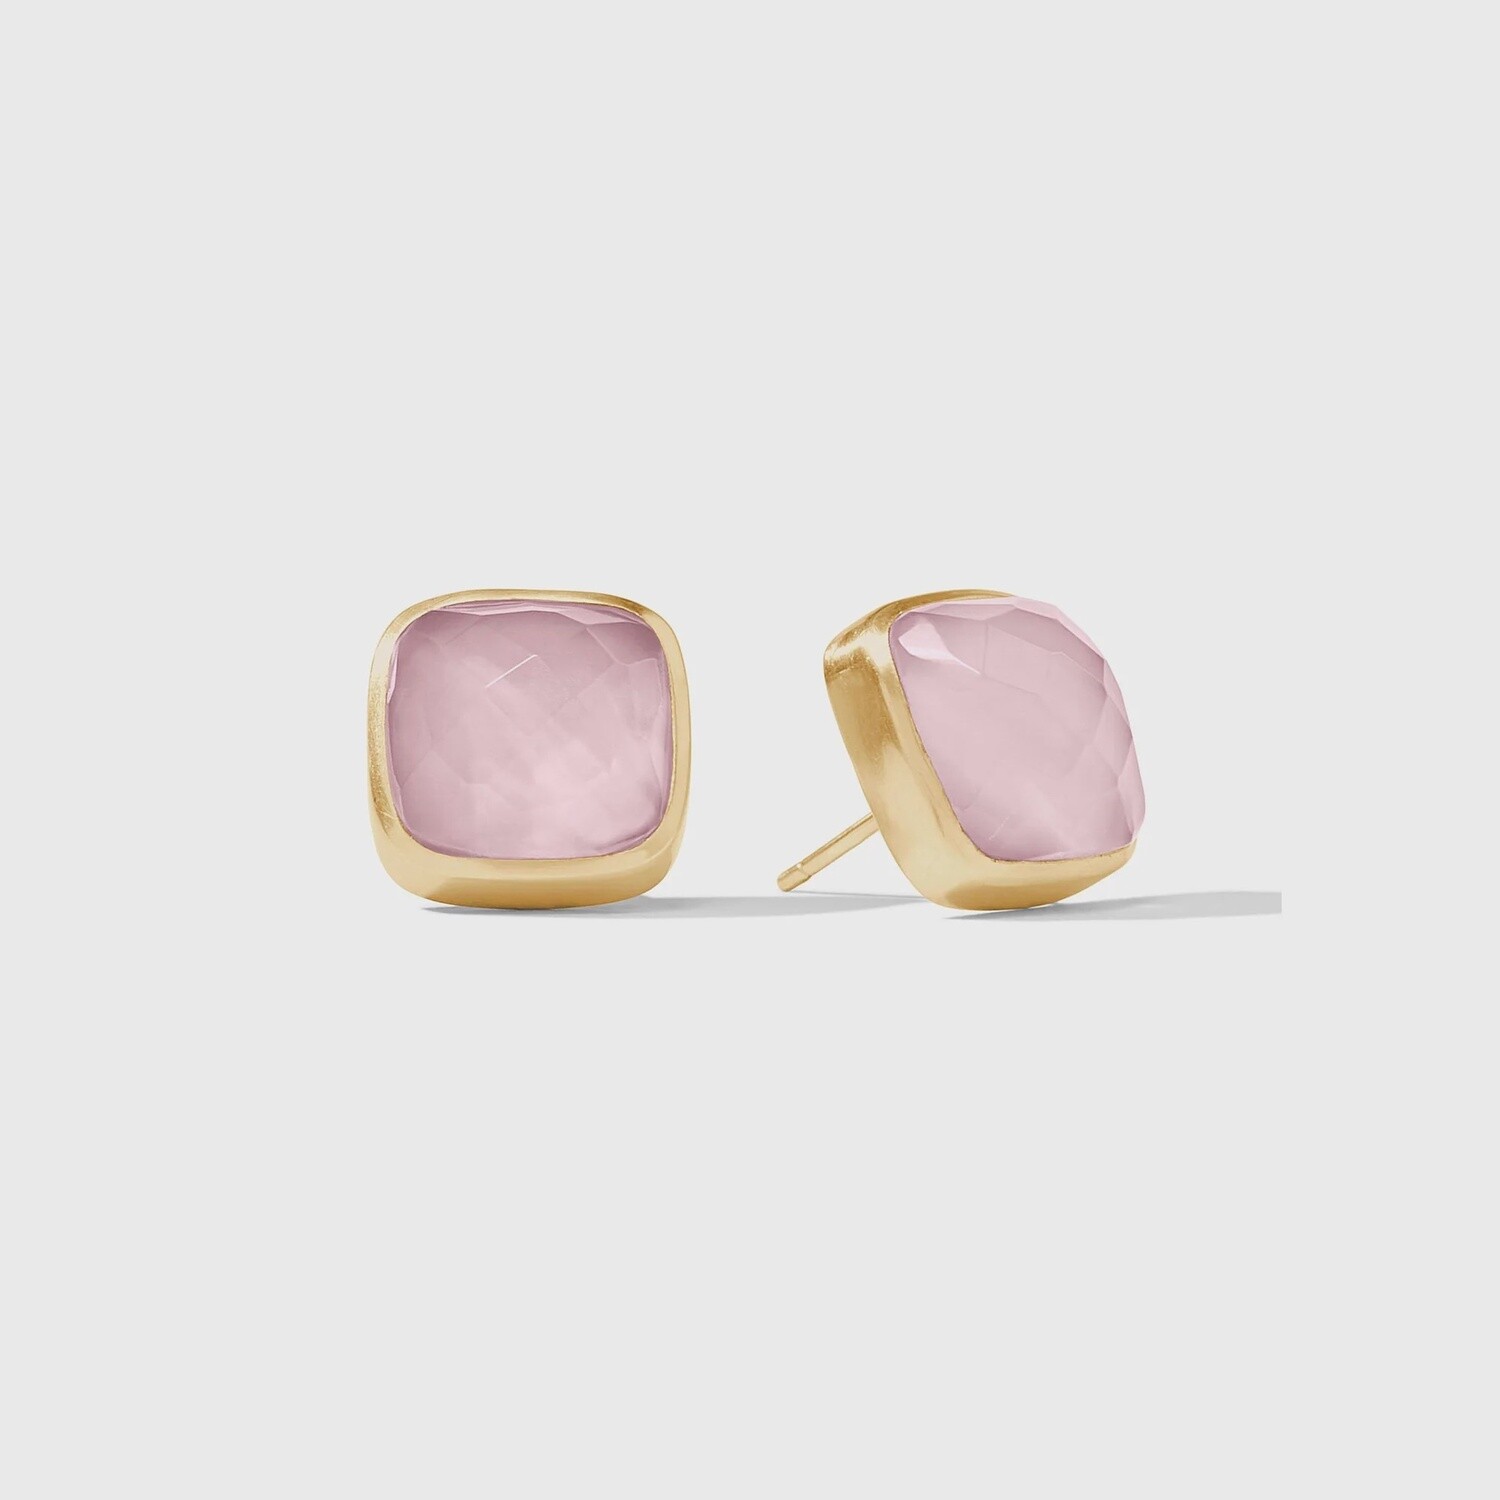 Julie Vos Catalina Stud Earring, color: Iridescent Rose